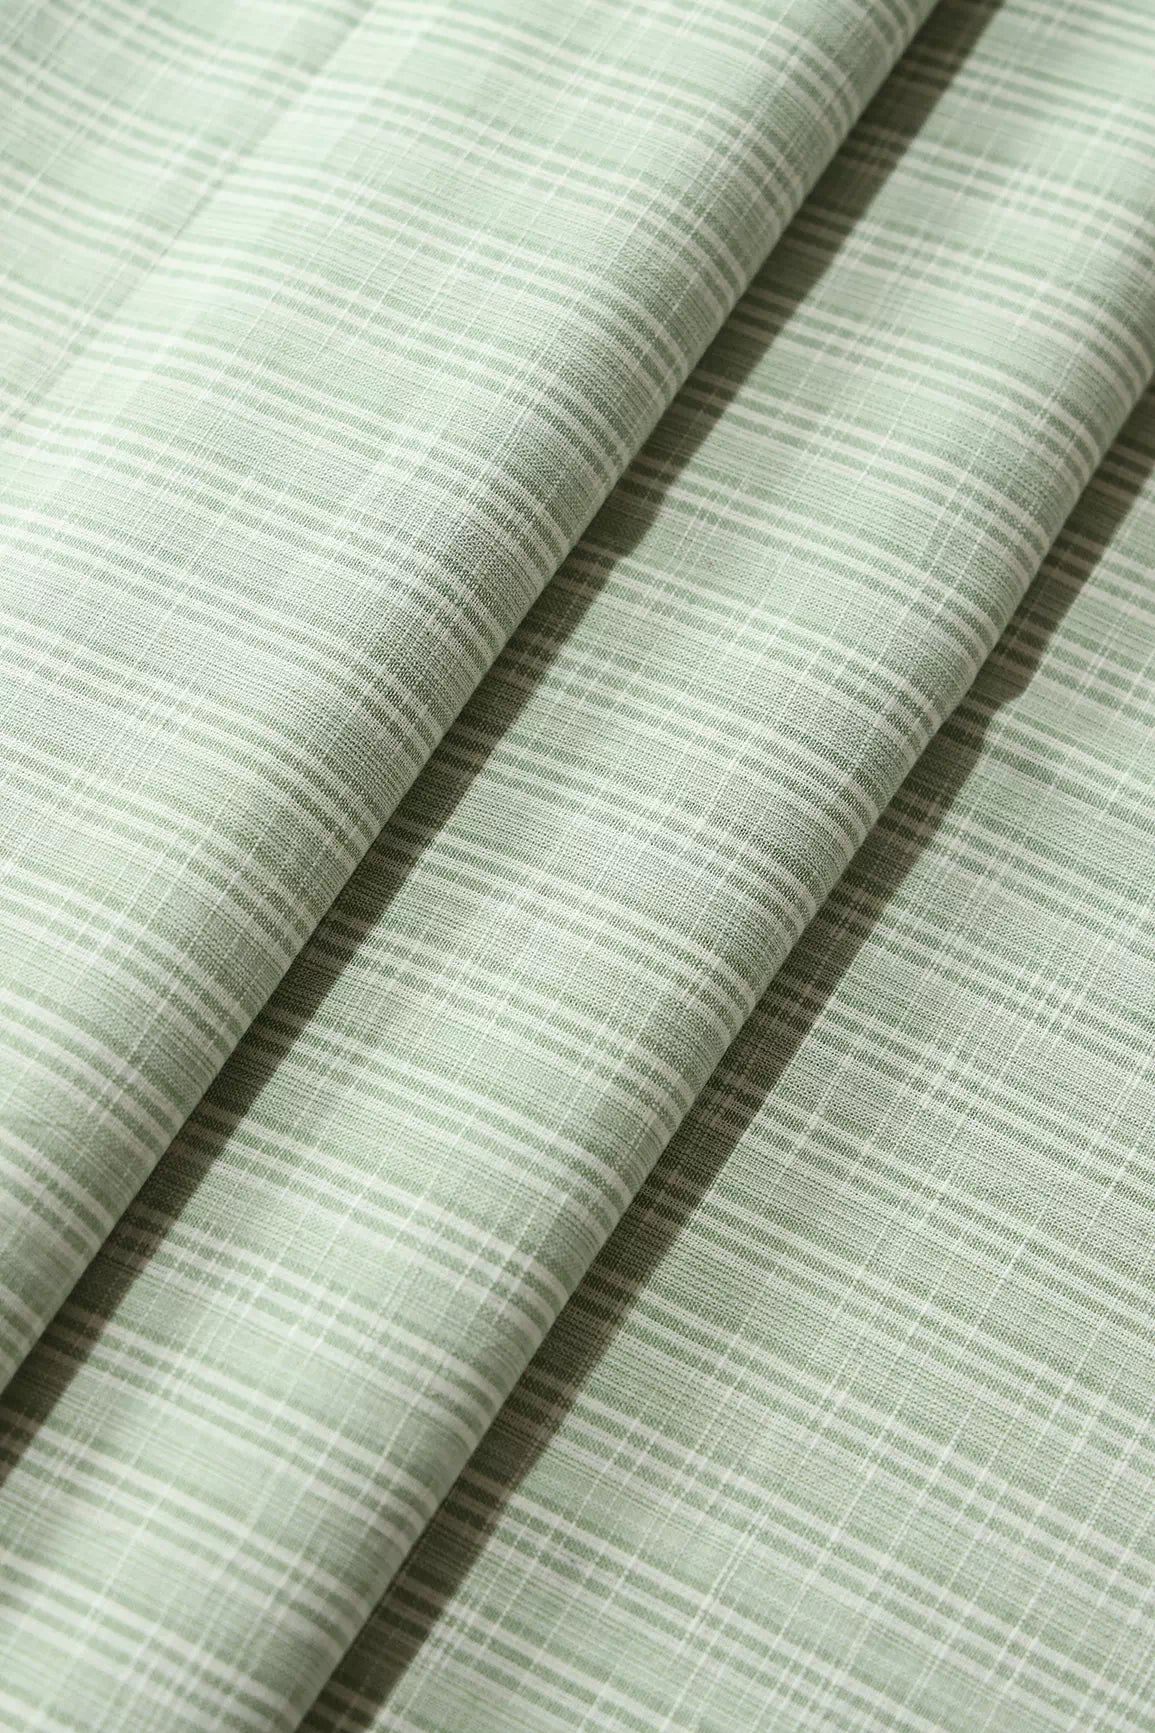 Light Olive And White Stripes Pattern Handwoven Organic Cotton Fabric